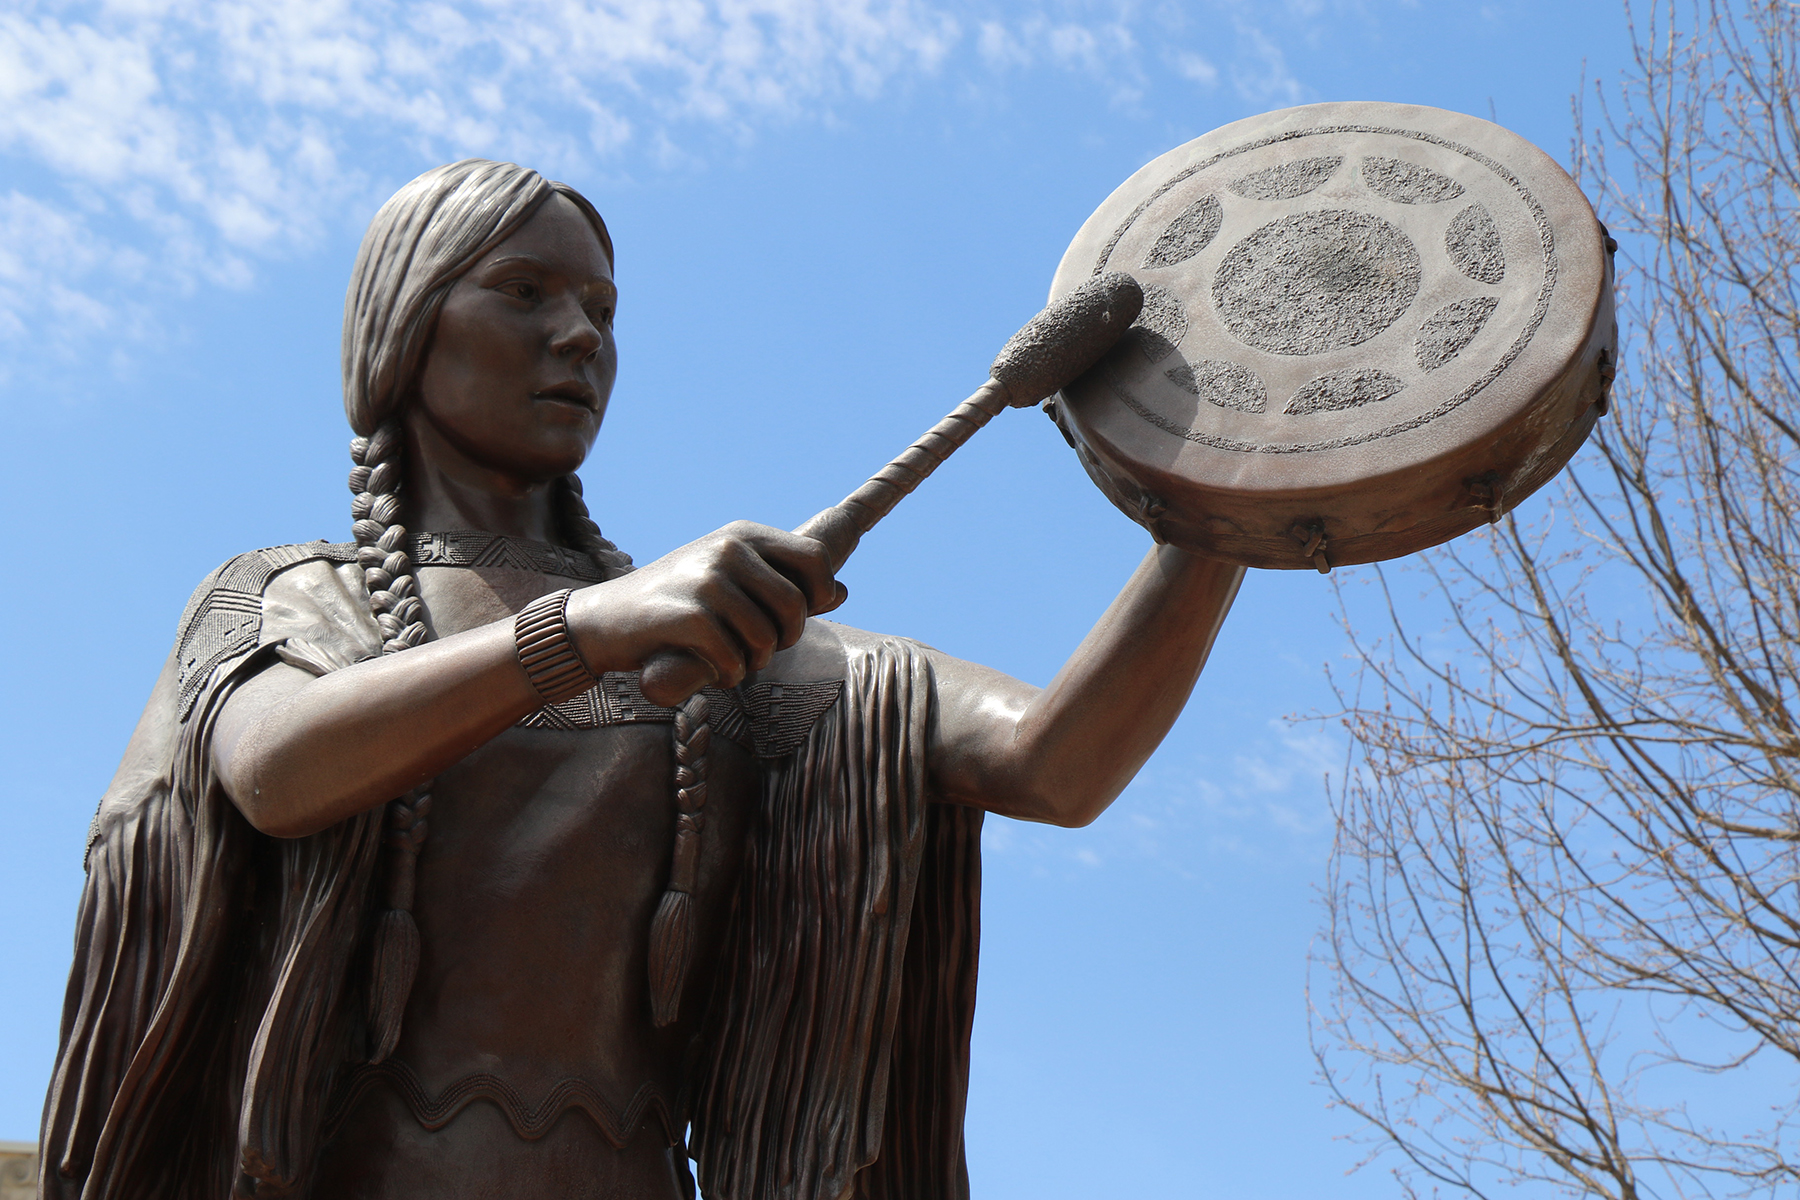 A statue depicting a woman in Native regalia as she strikes a hand drum with a mallet